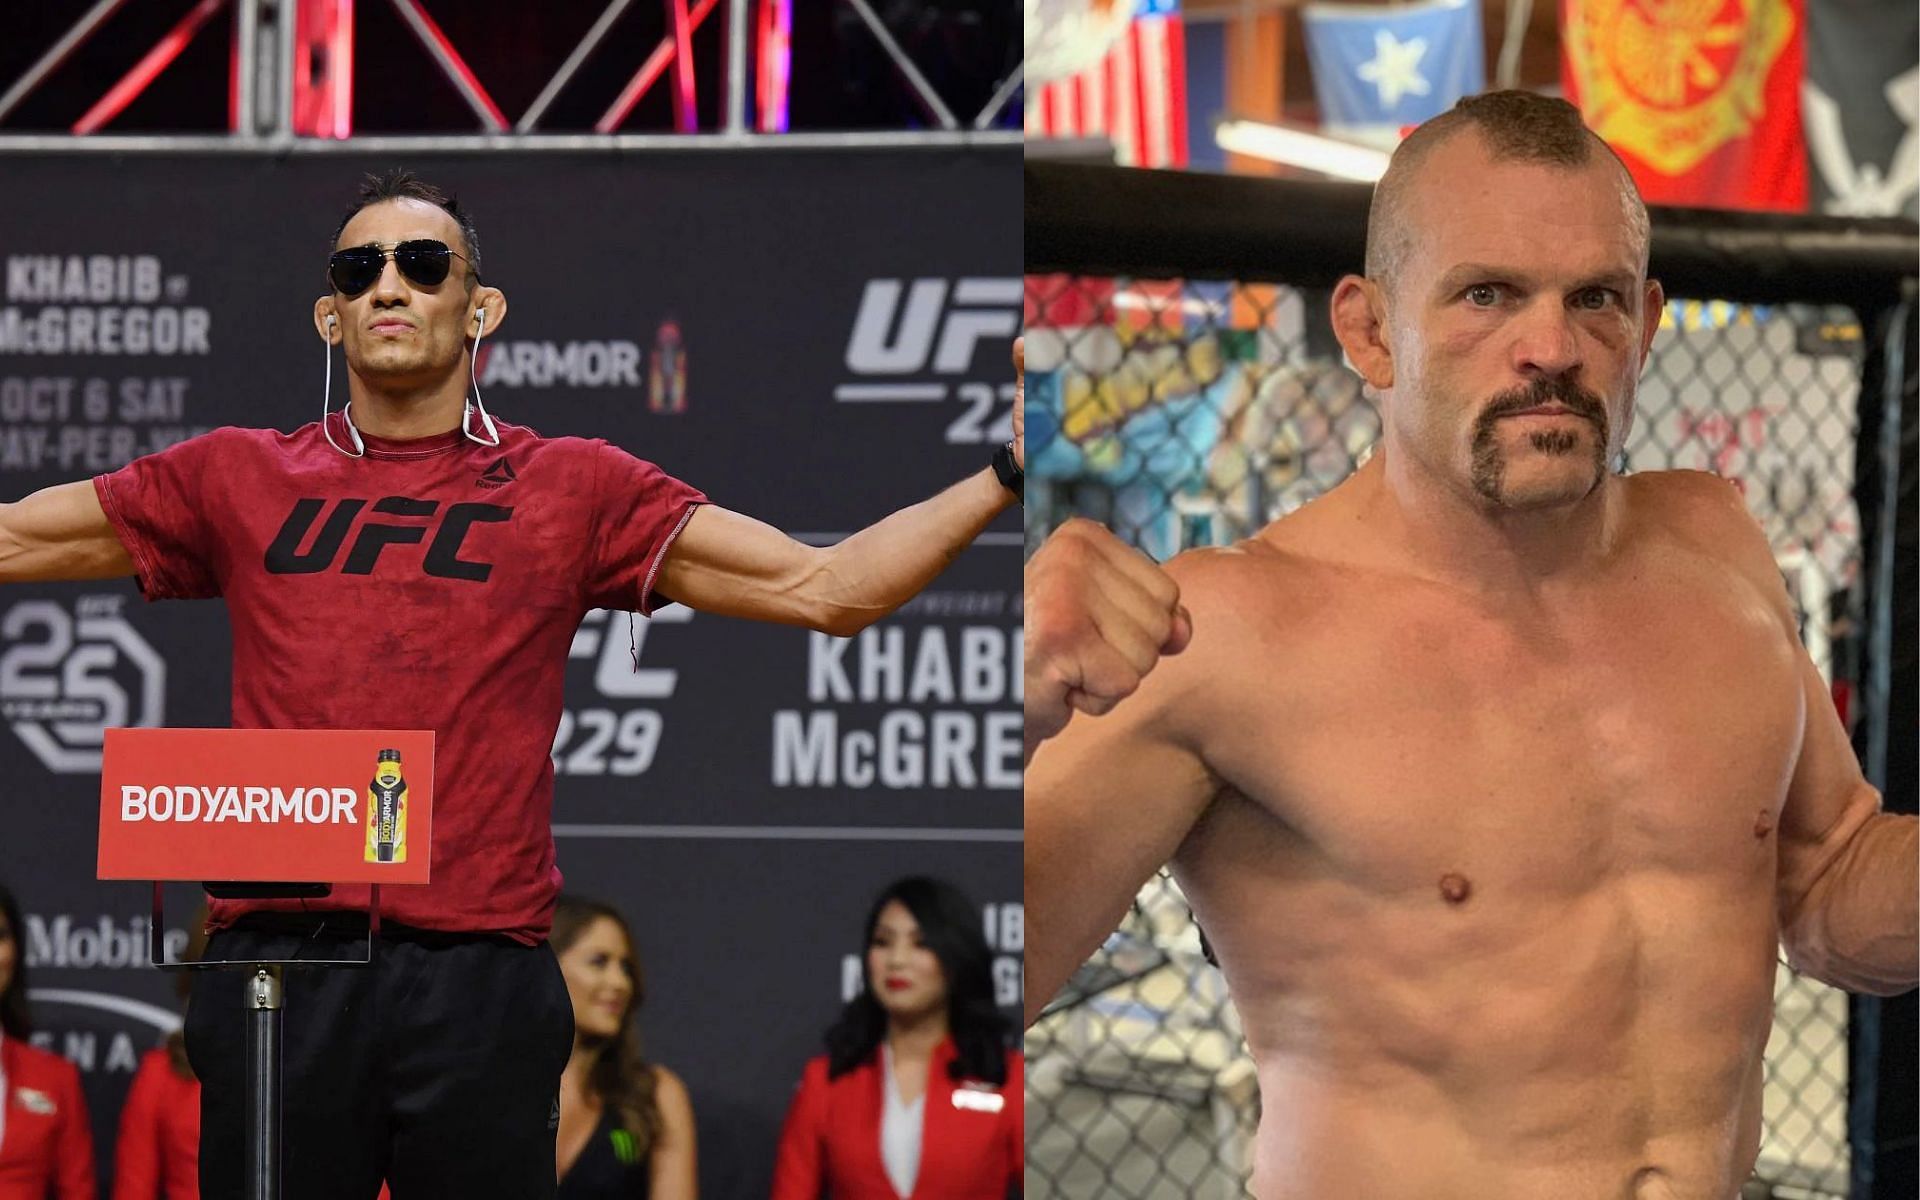 Tony Ferguson and Chuck Liddell [Images via: @chuckliddell on Instagram, and getty]